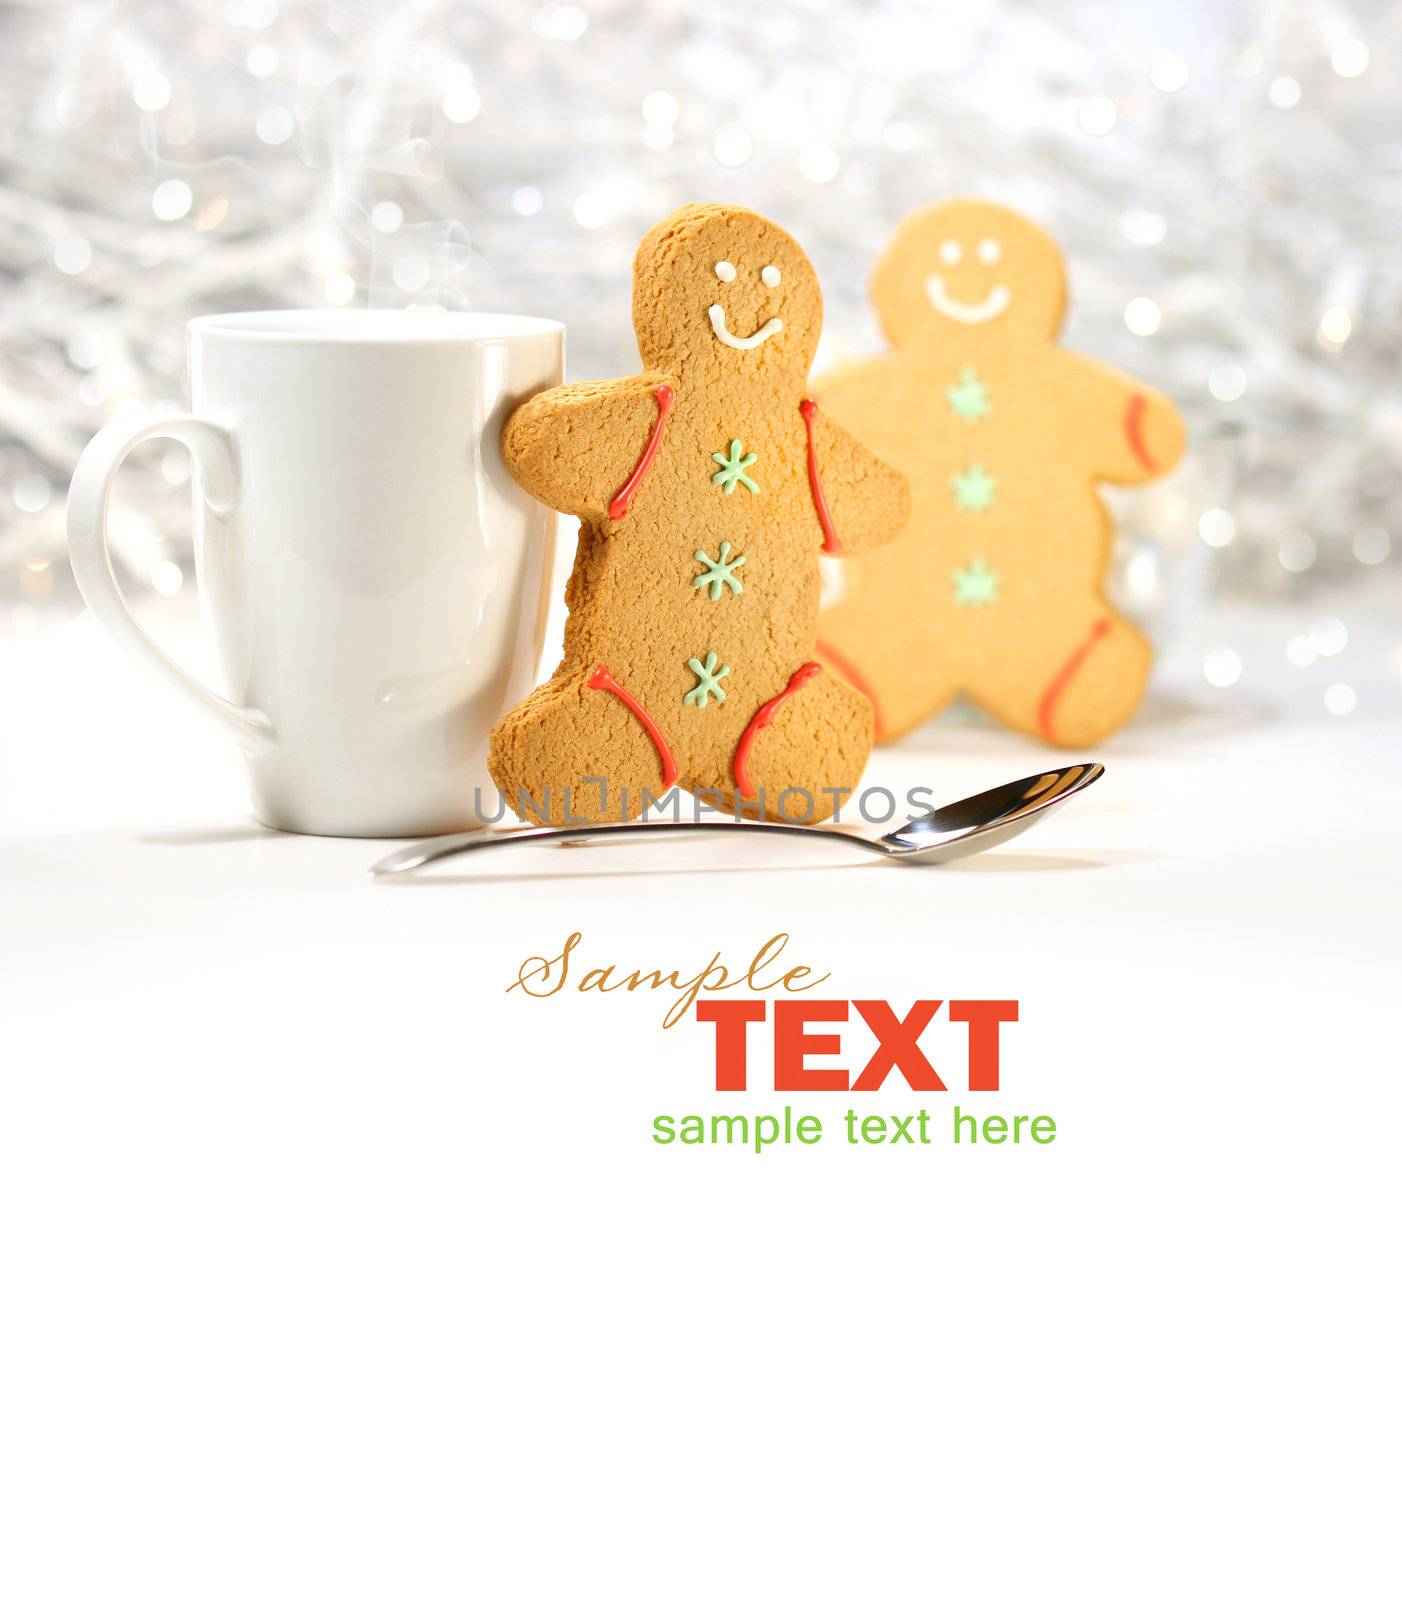 Hot holiday drink with gingerbread cookies on festive background